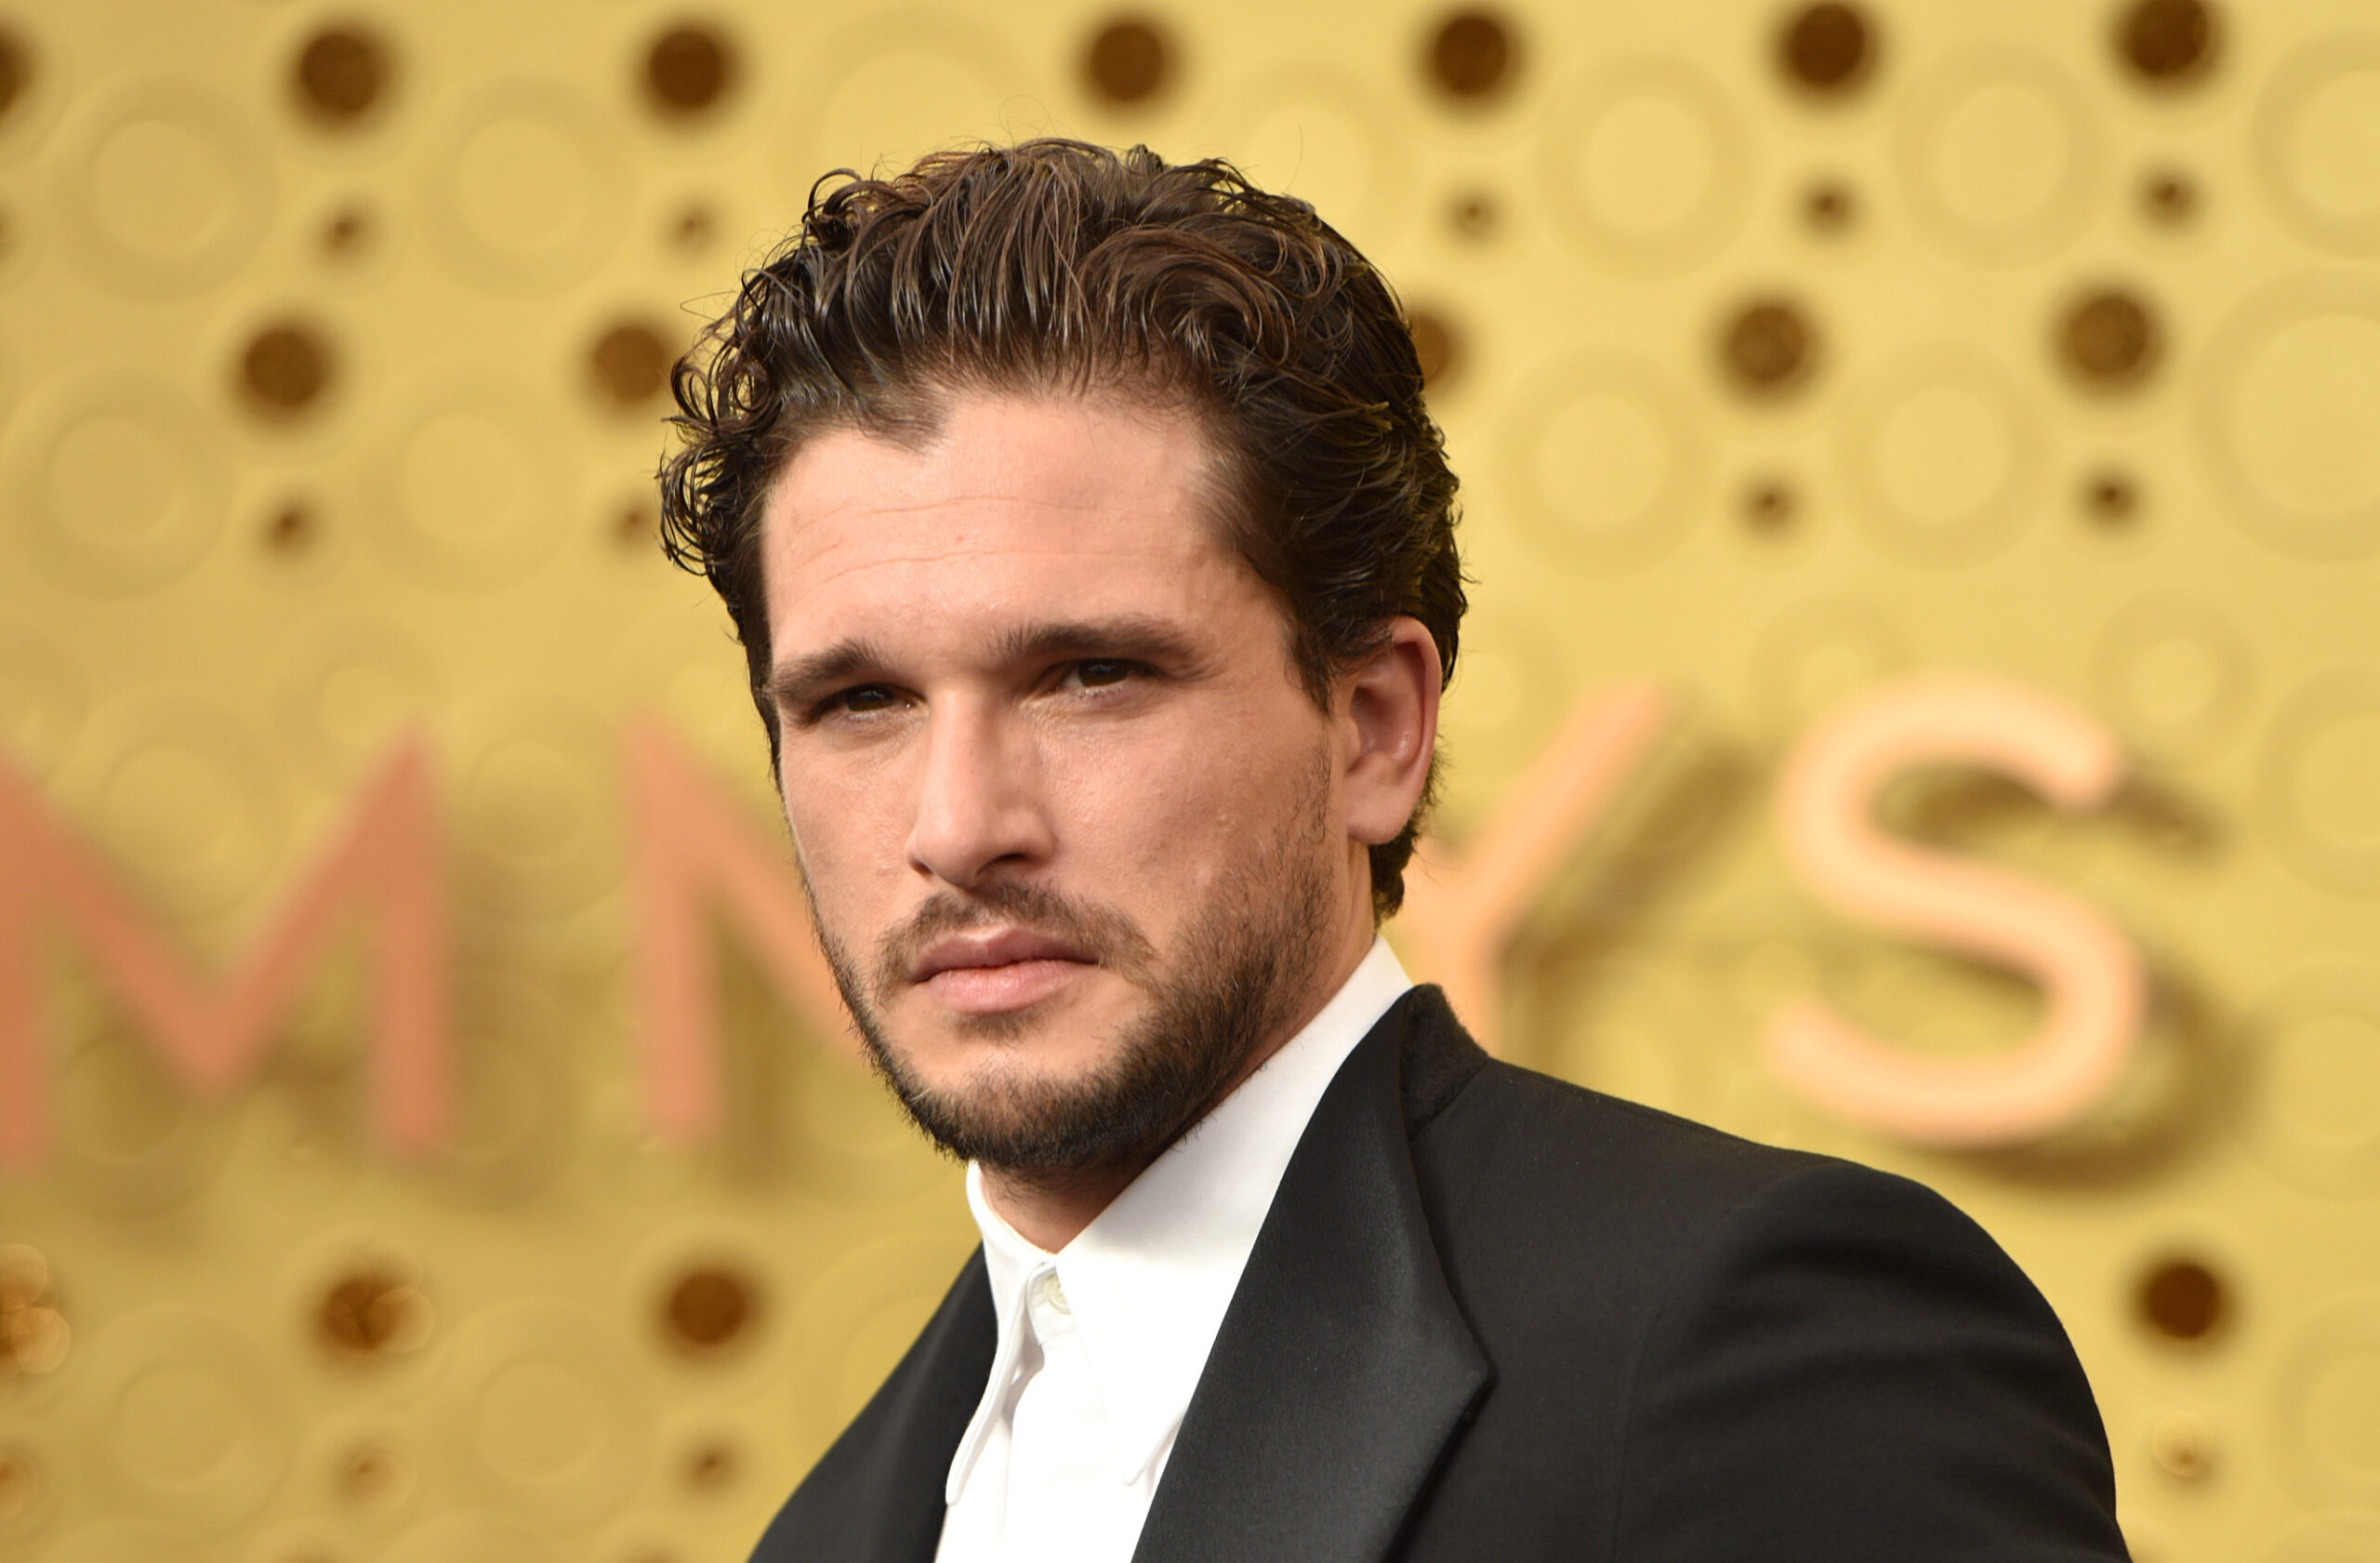 Kit Harington of ‘Game of Thrones’ fame shifts focus from hero roles to seeking complex characters